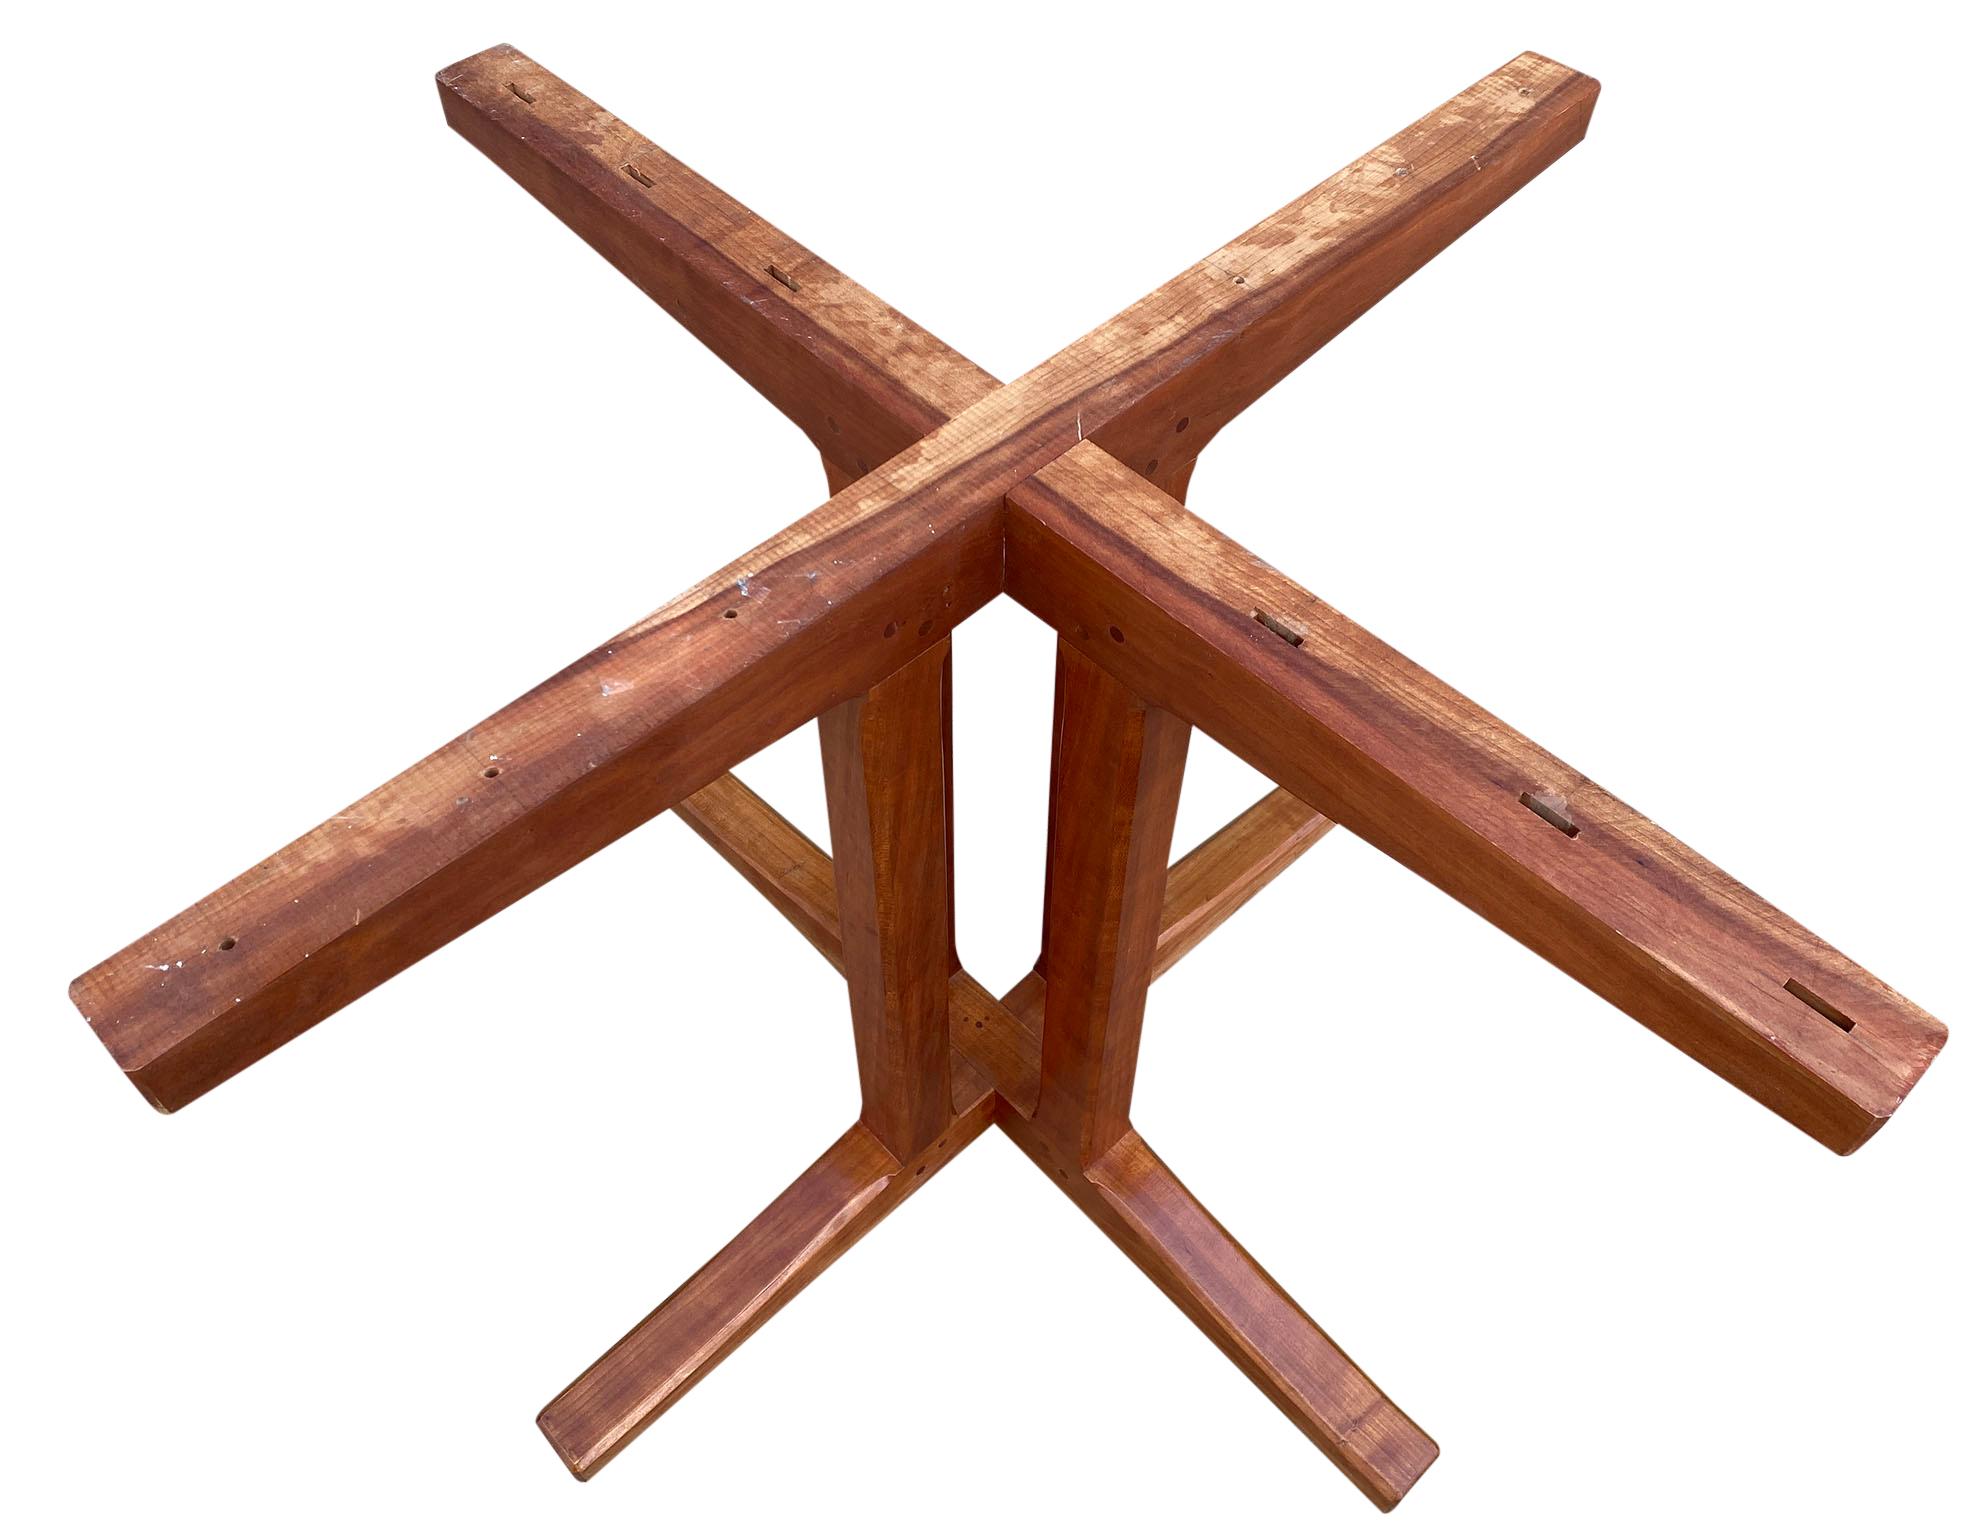 American Studio Craft Round Solid Cherry Dining table by Charles Shackleton Vermont